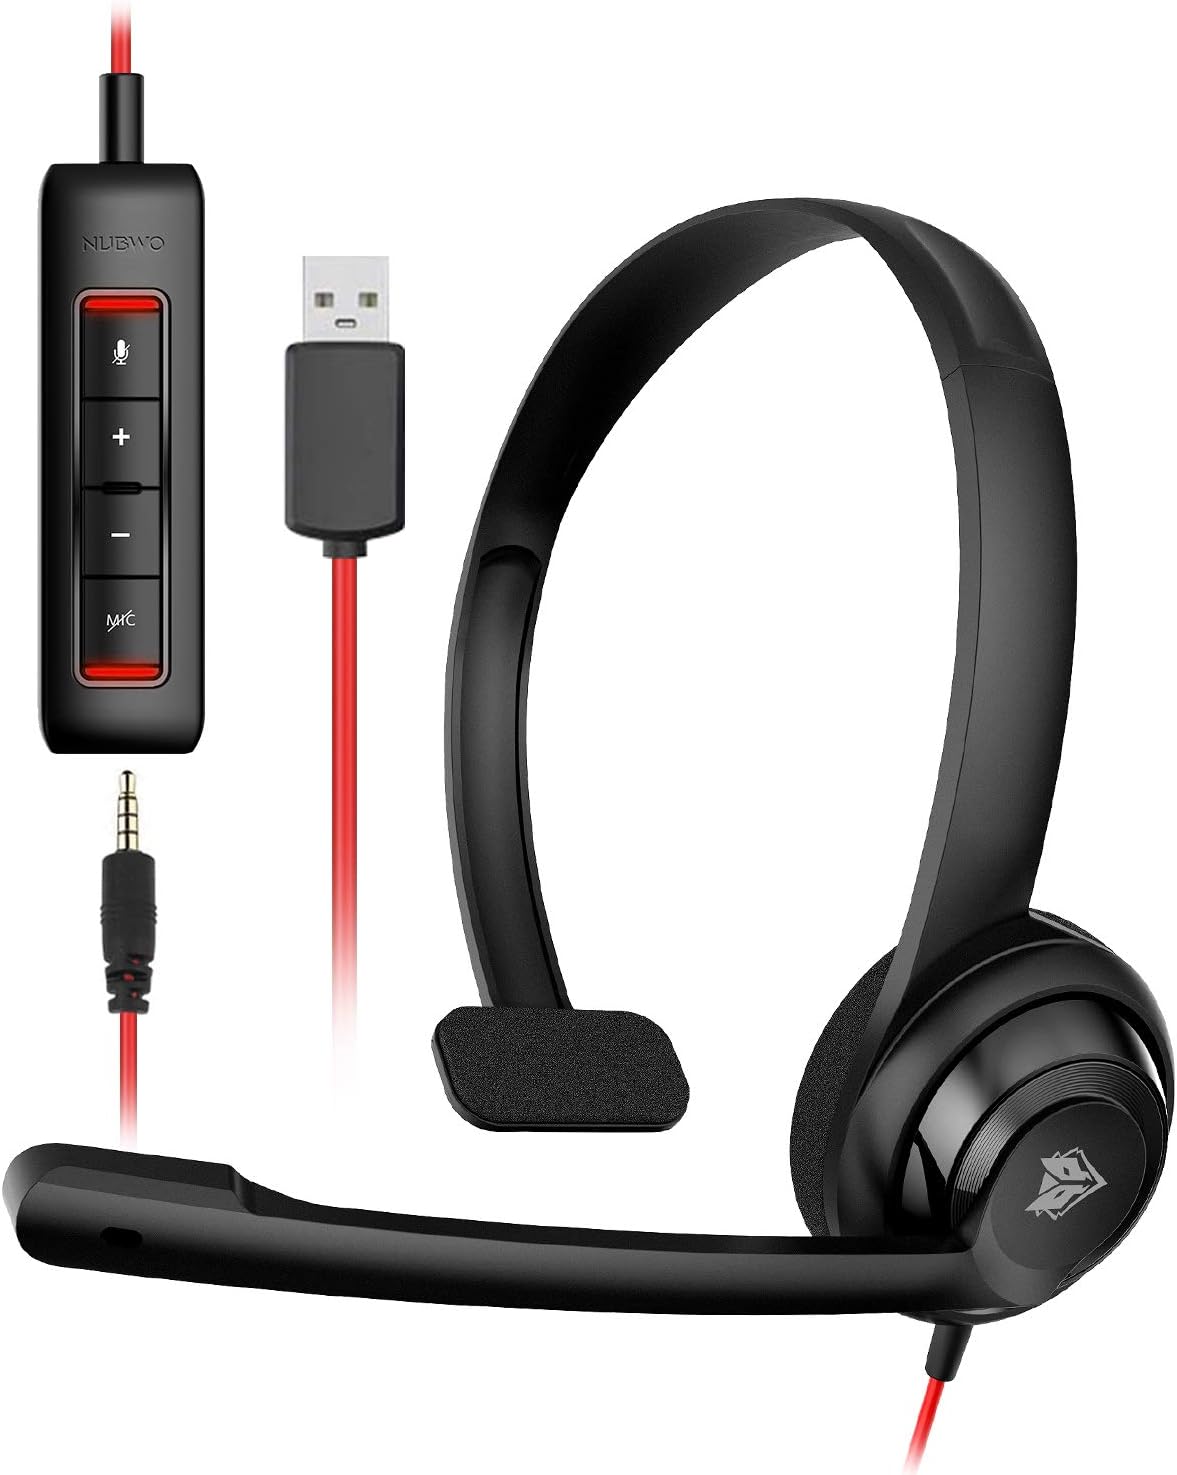 NUBWO HW02 USB Headset with Microphone Noise Cancelling &in-line Control, Ultra Comfort Computer Headset for Laptop pc, On-Ear Wired Office Call Center Headset for Boom Skype Webinars（Black）